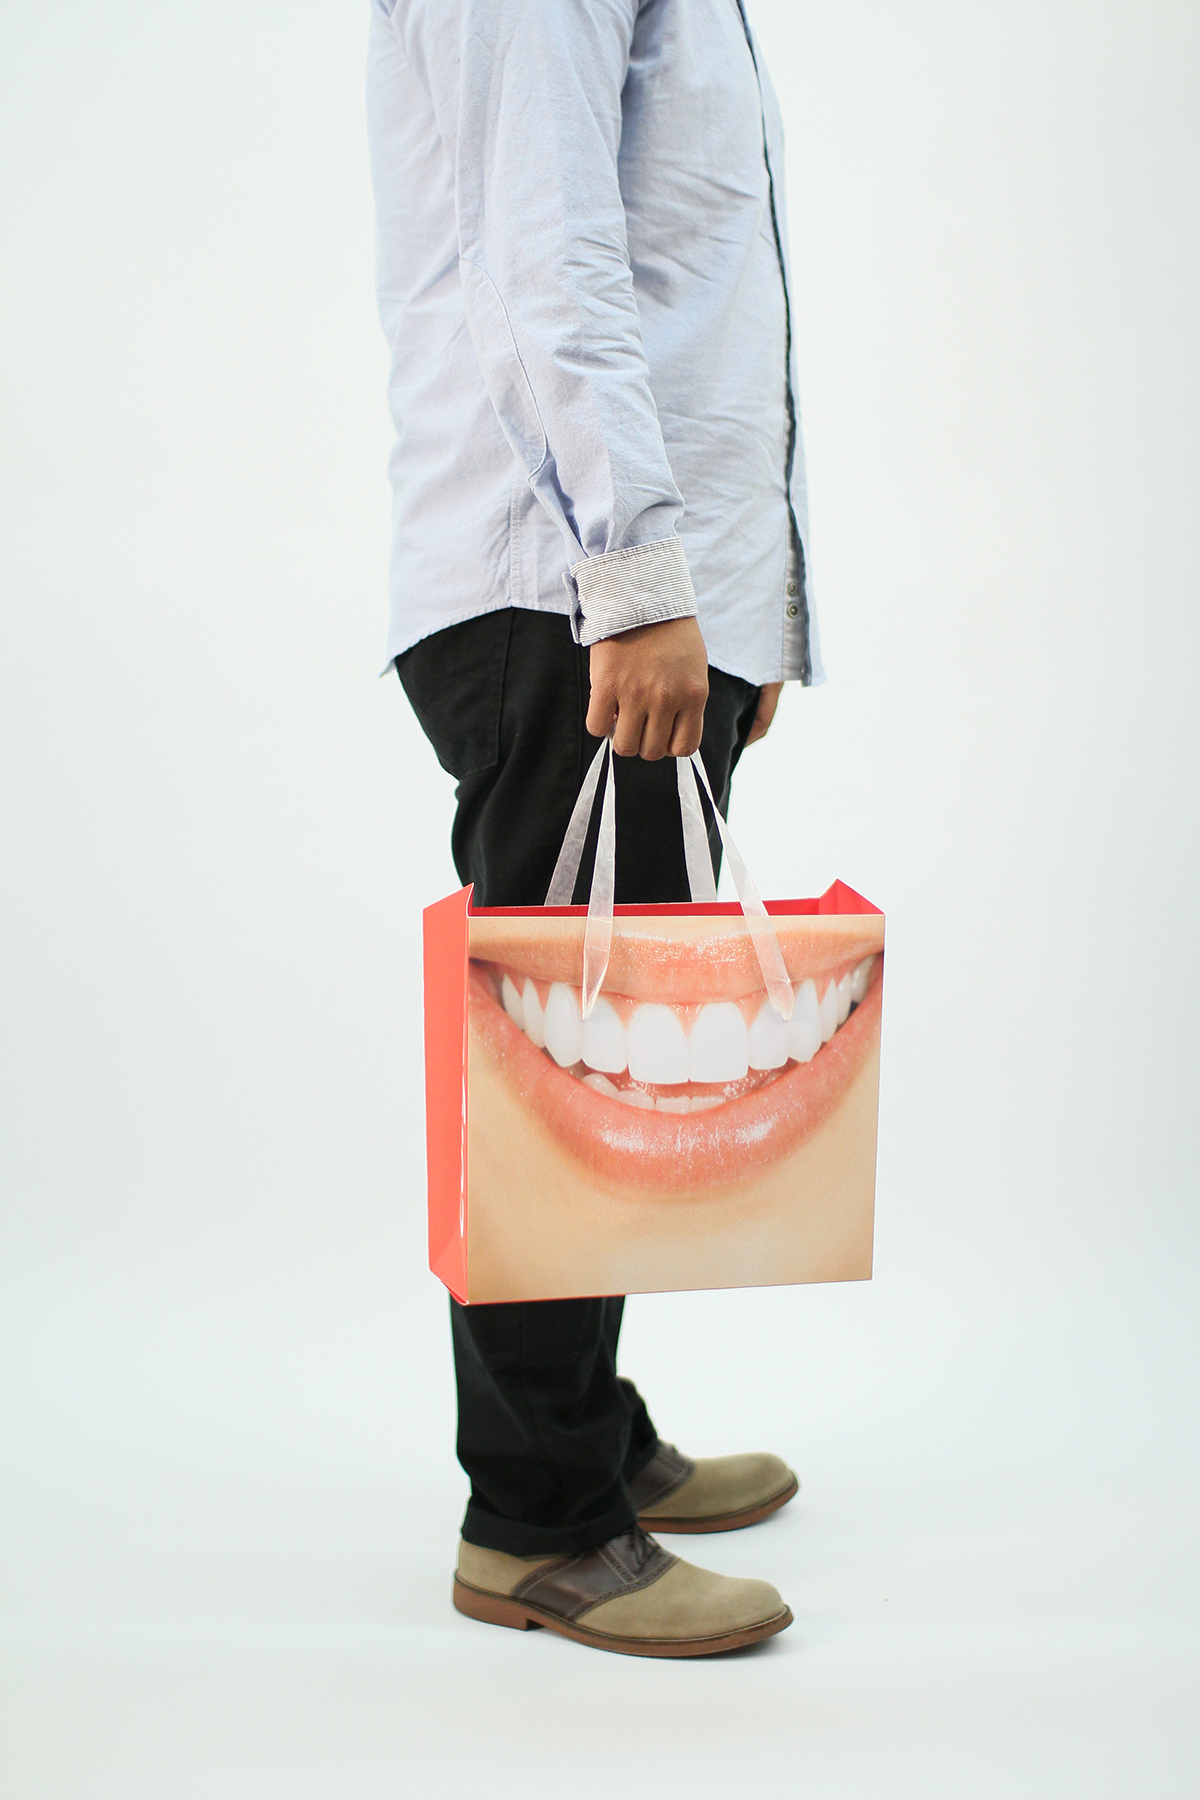 colgate interactive bag bagvertisement concept teeth floss design Shopping interaction Consumer White pearly whites brand